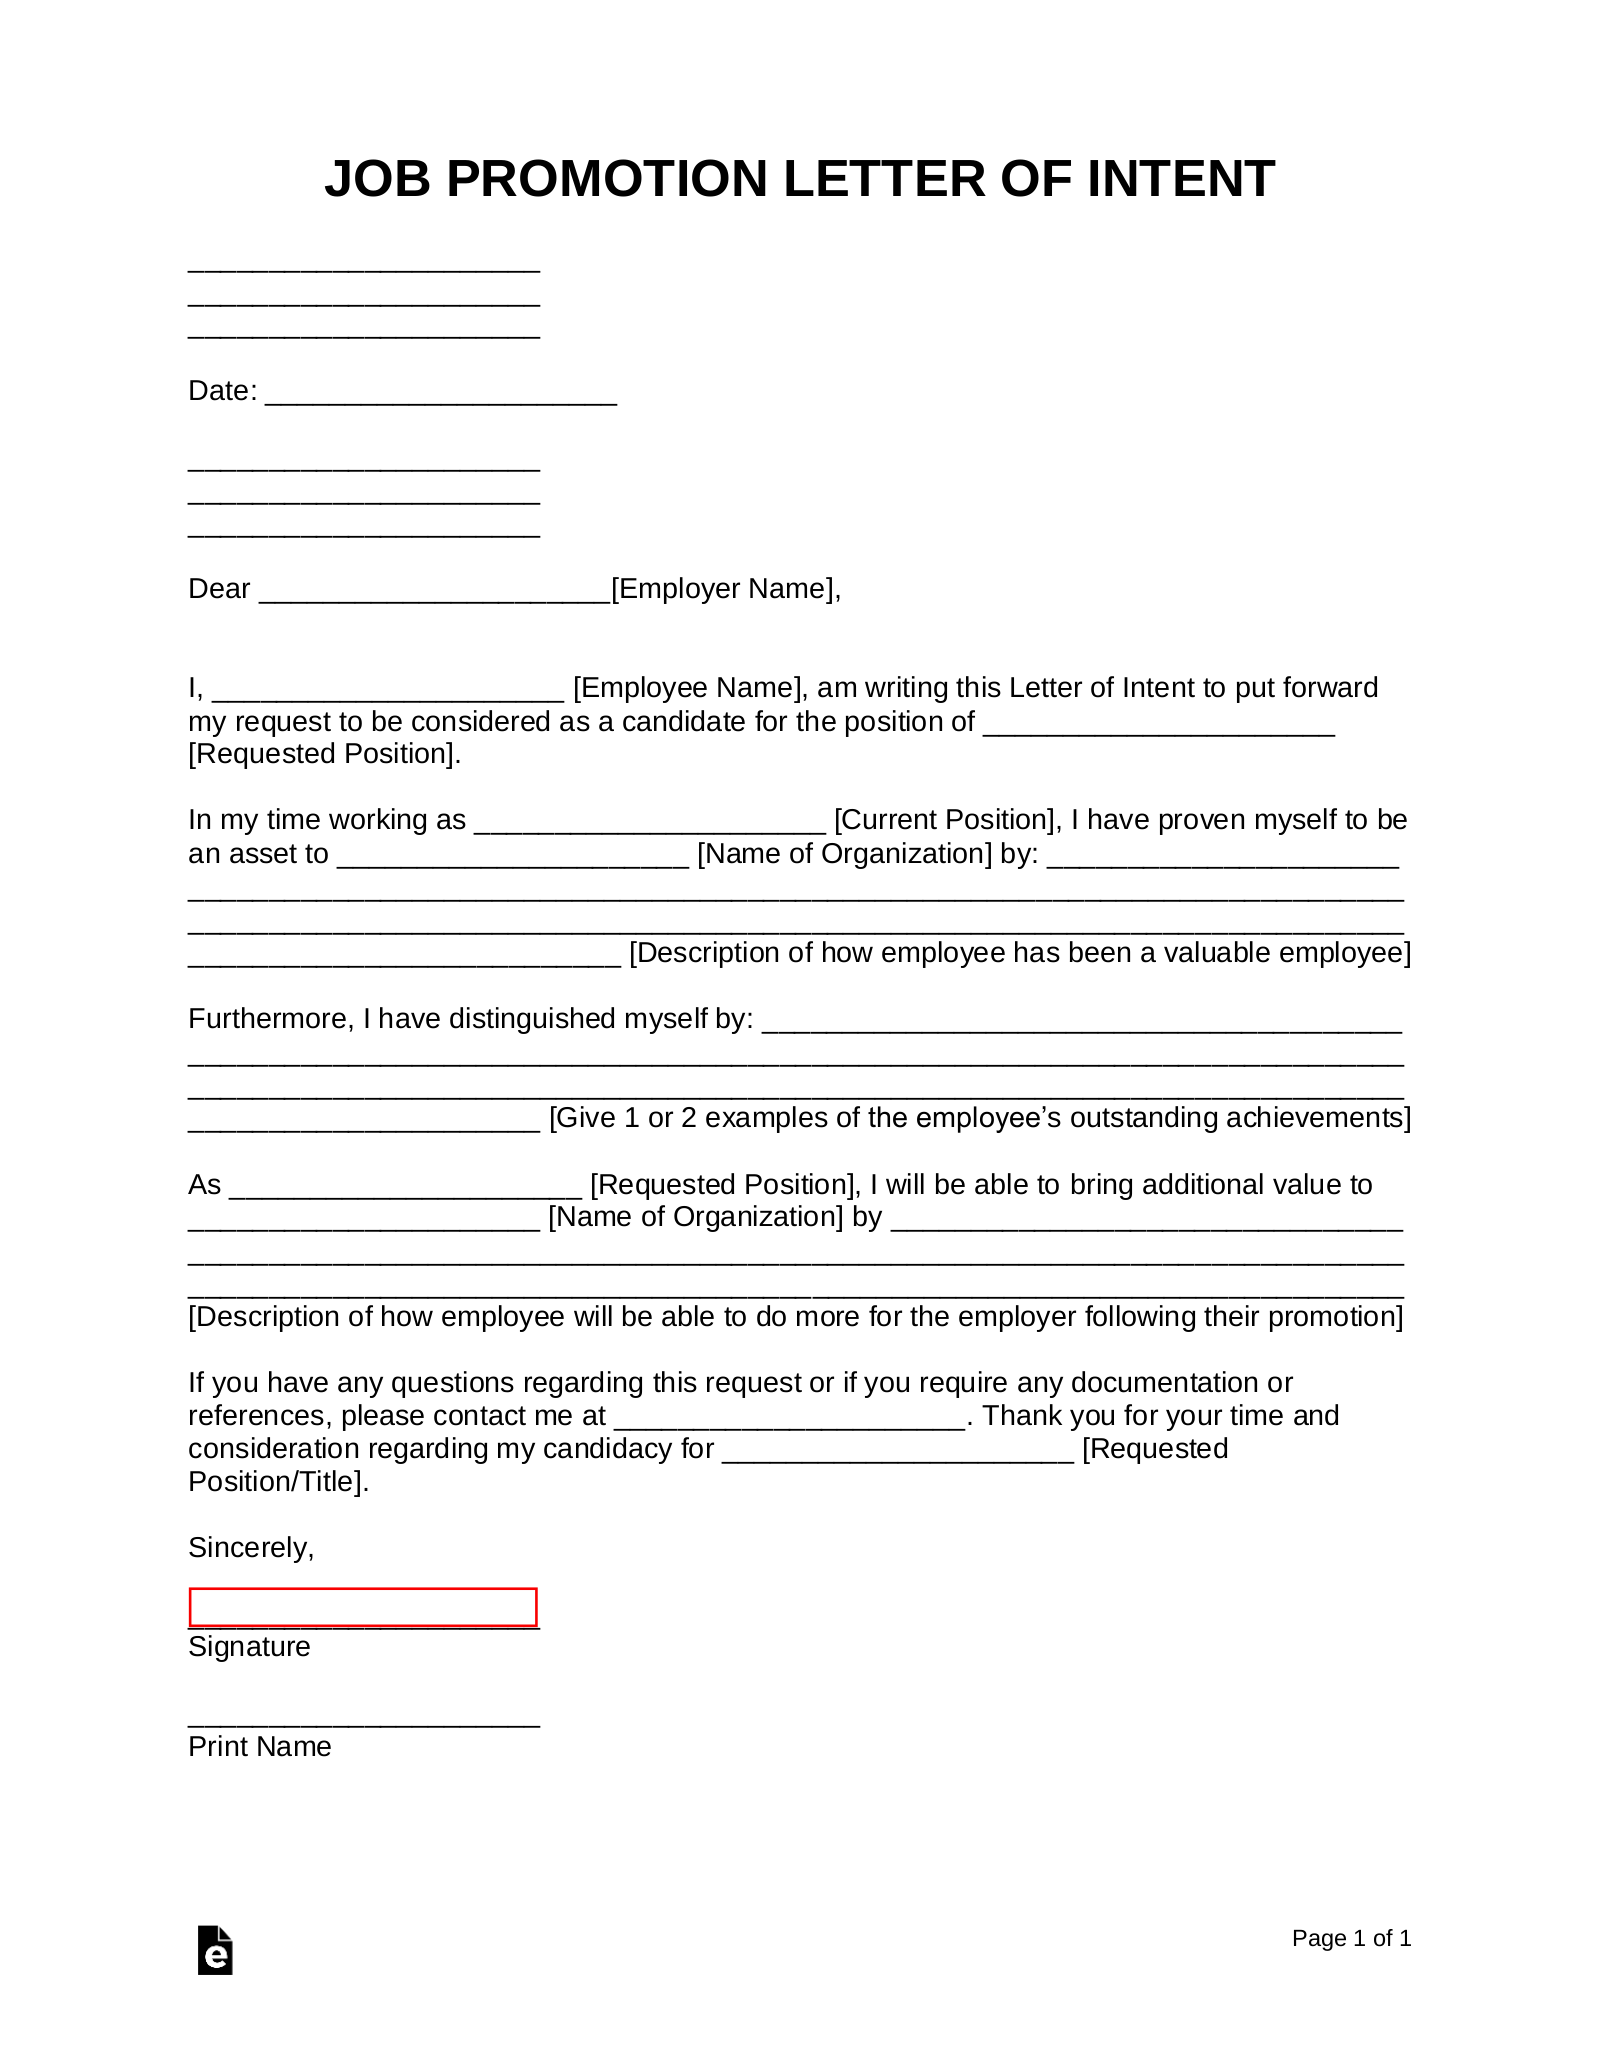 Sample Letter Of Intent For Job Opening from eforms.com